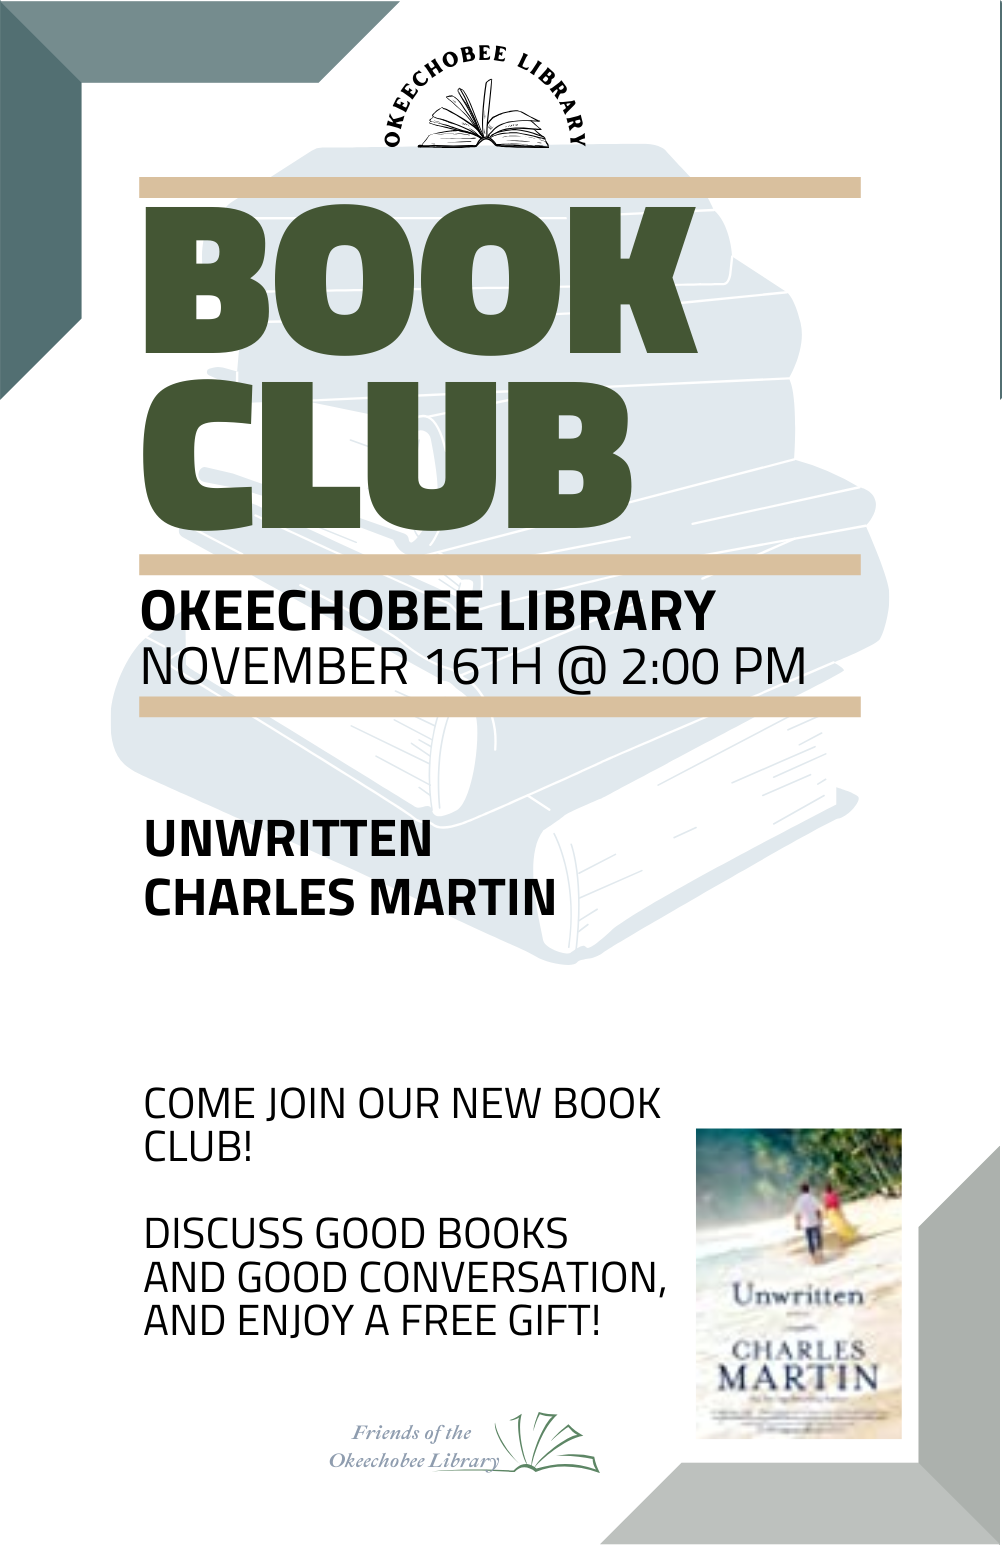 This month we will be discussing 'Unwritten' by Charles Martin. Also every month we have a small FREE gift for attendees!